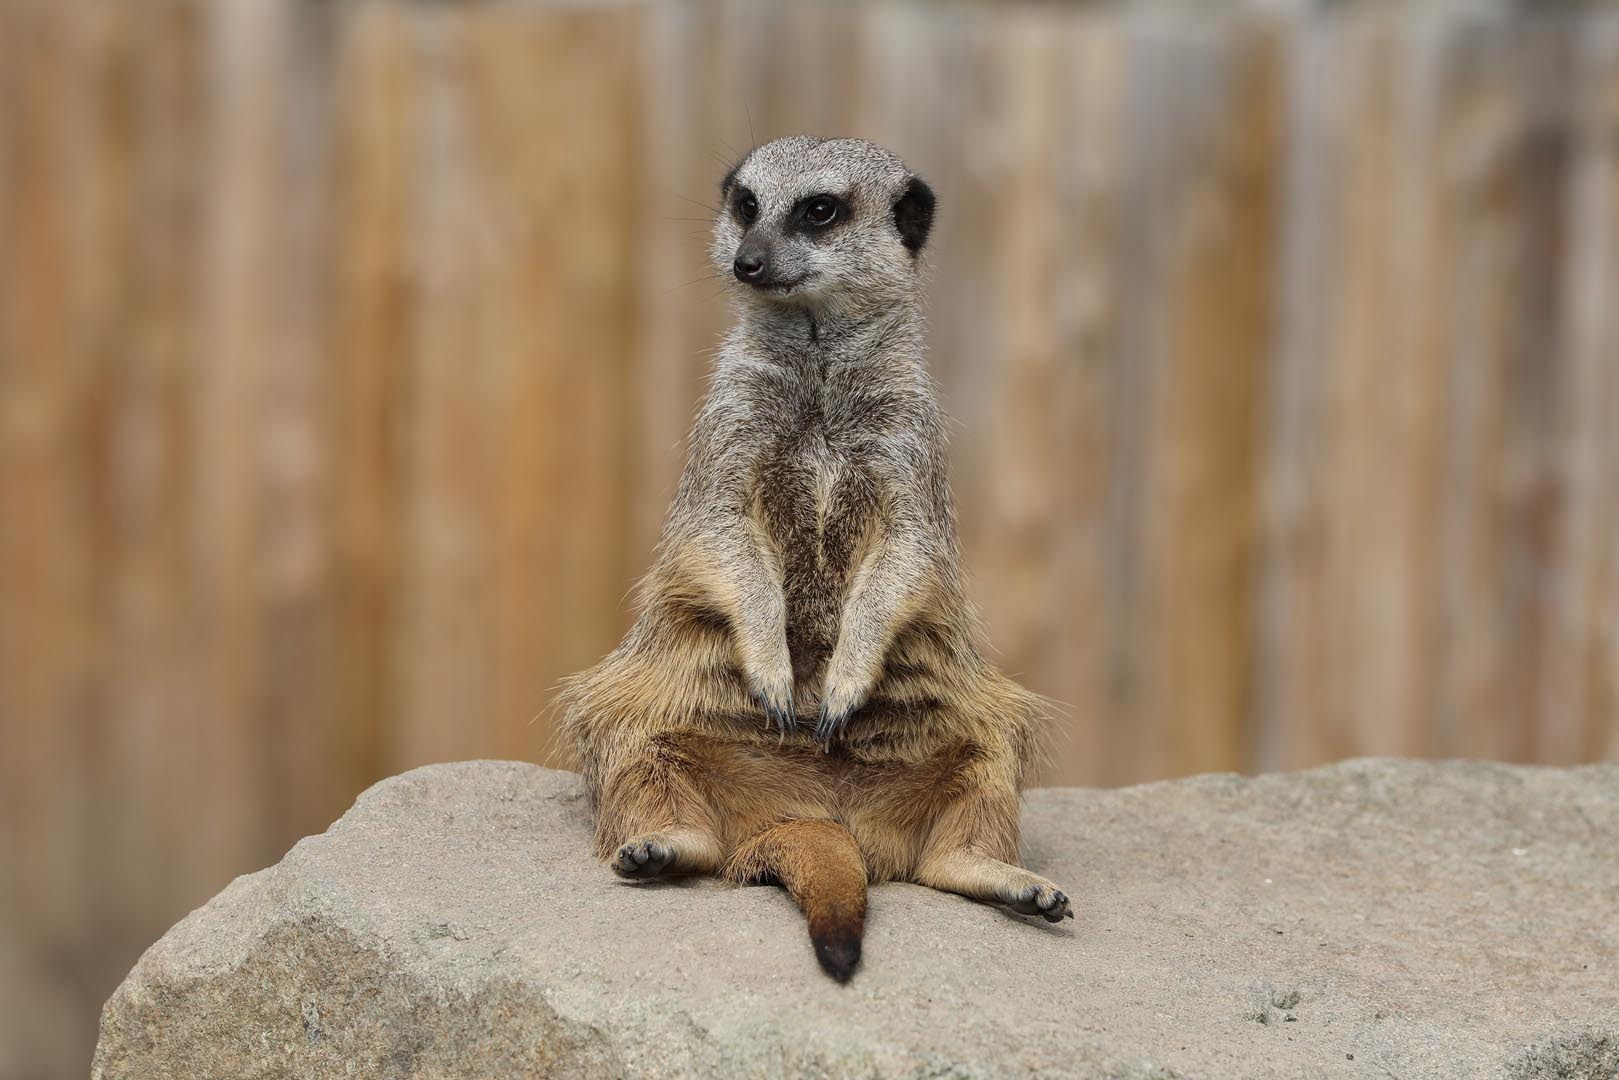 Meerkat sitting on a rock with legs outstretched. IMAGE: Amy Middleton 2023